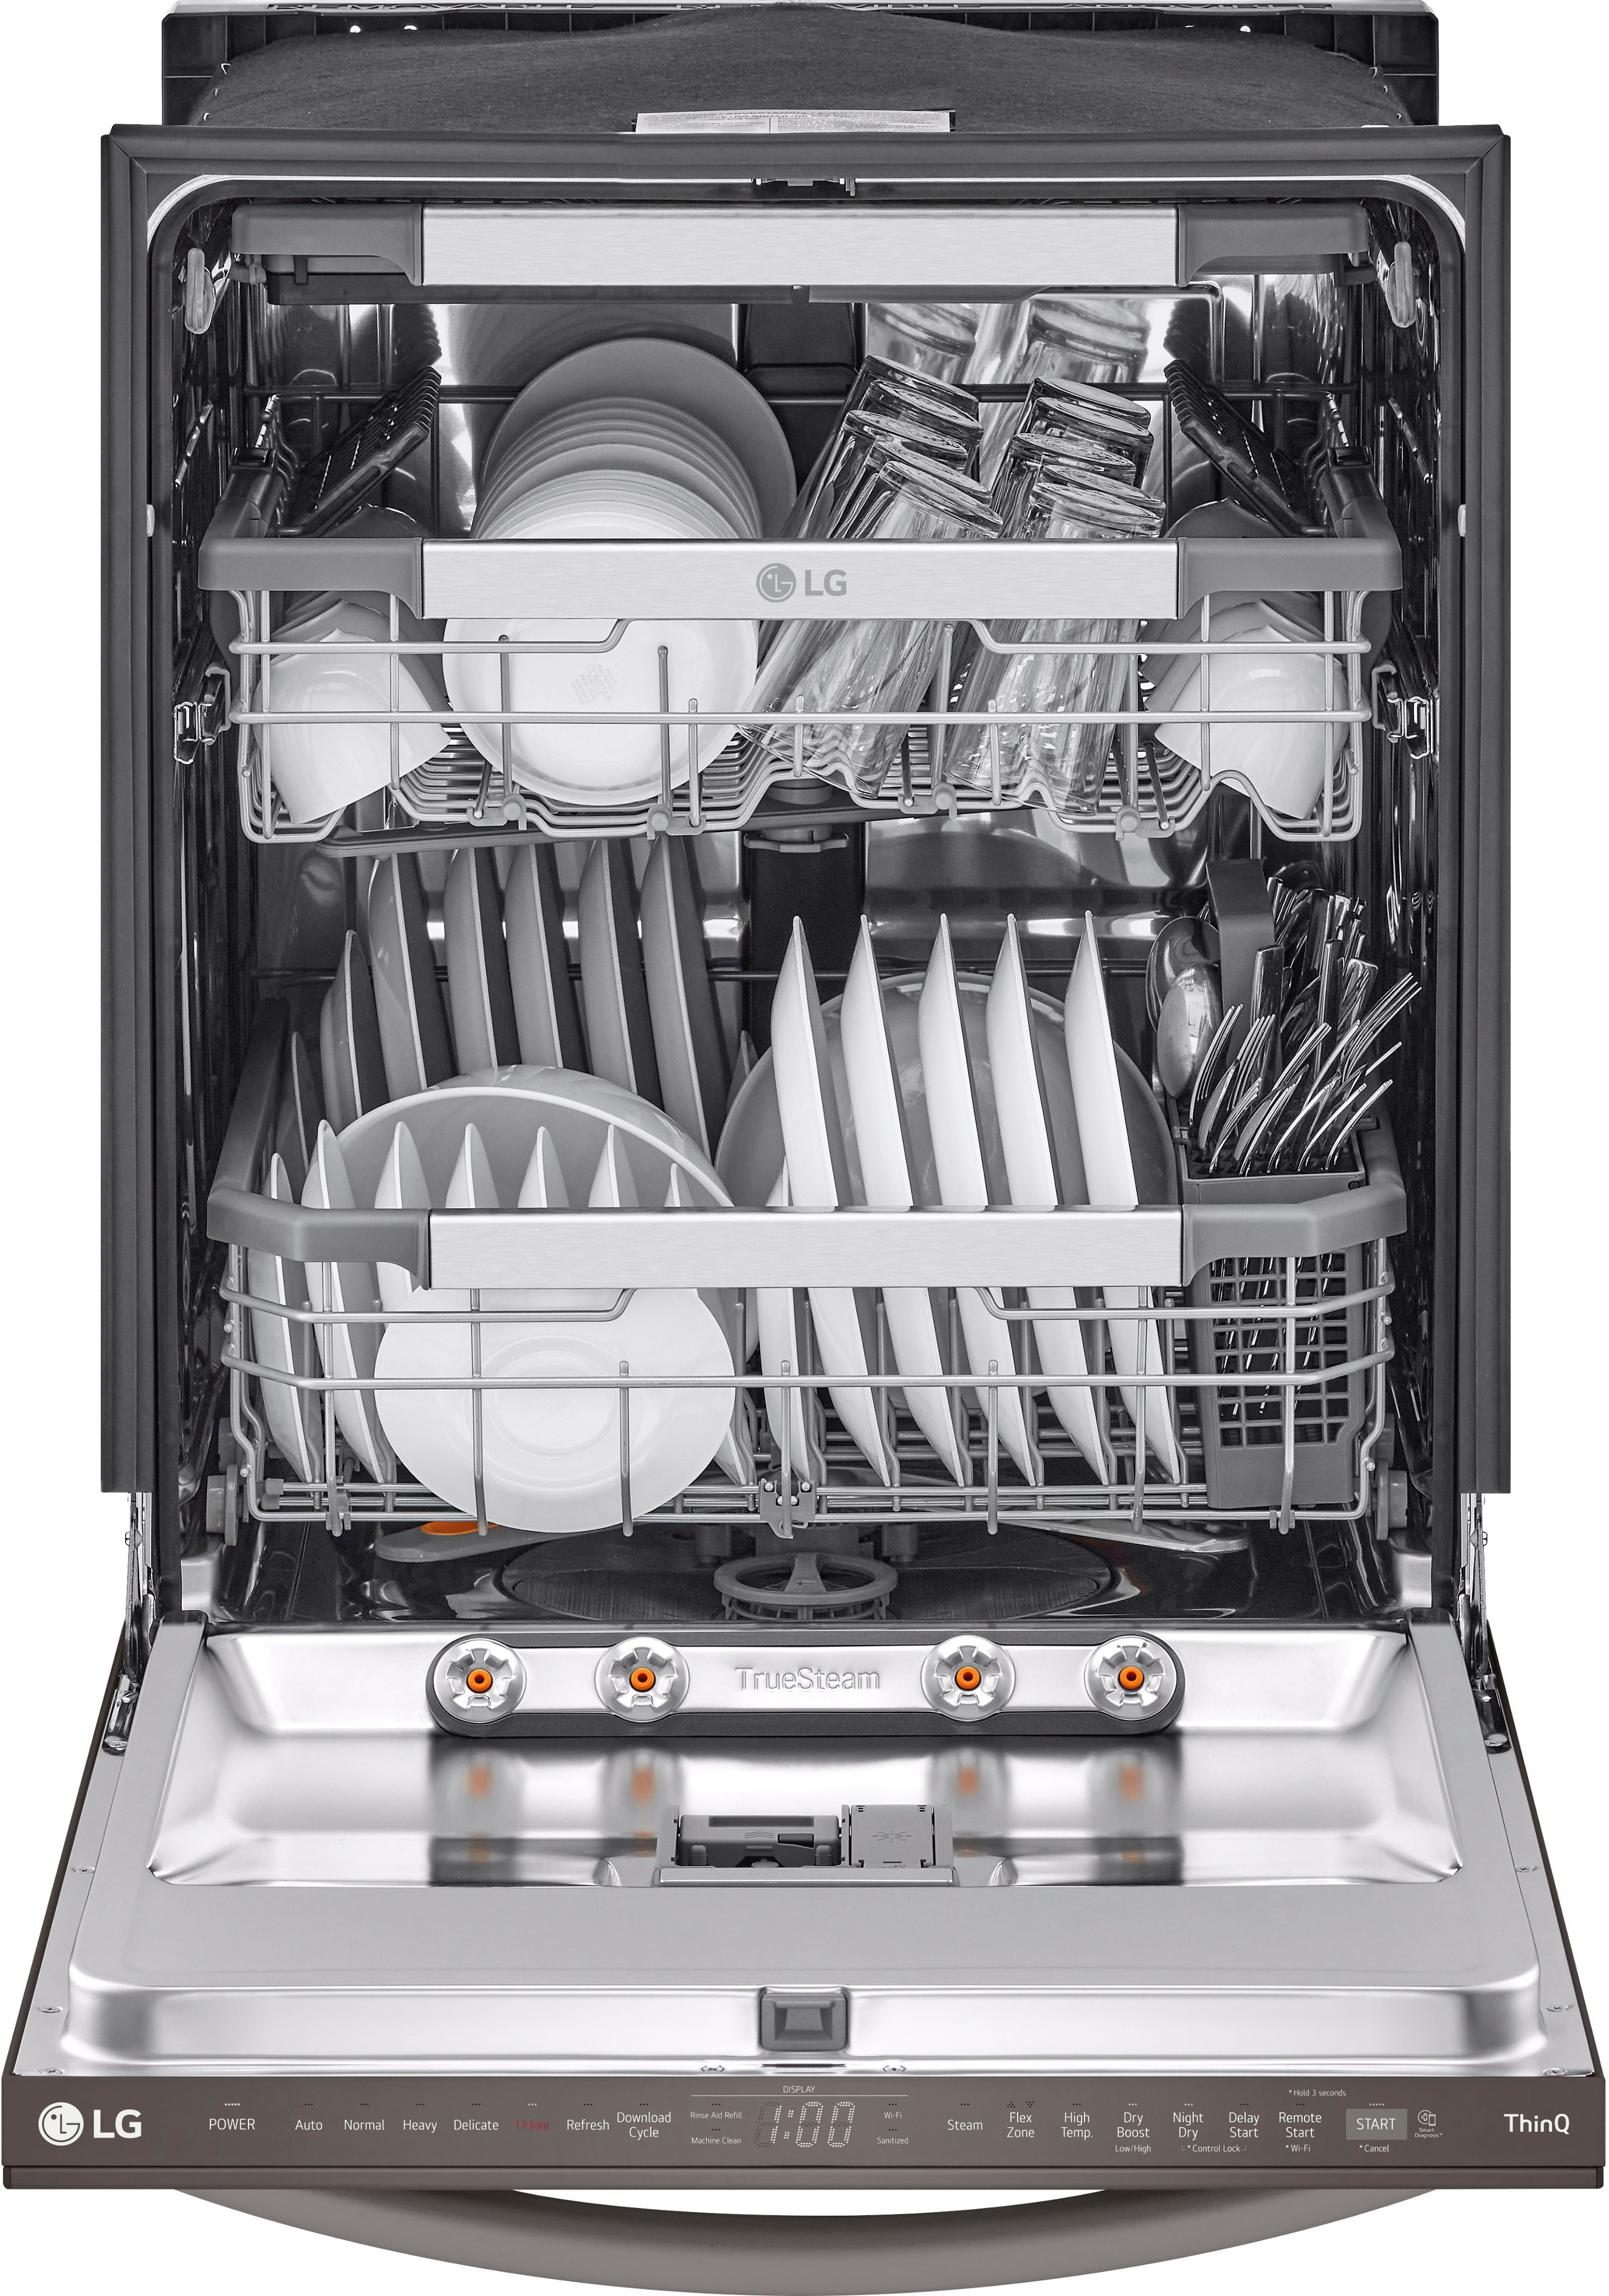 LG 24 Built-In Bar Handle Dishwasher with 3rd Rack in Print Proof Black  Stainless Steel